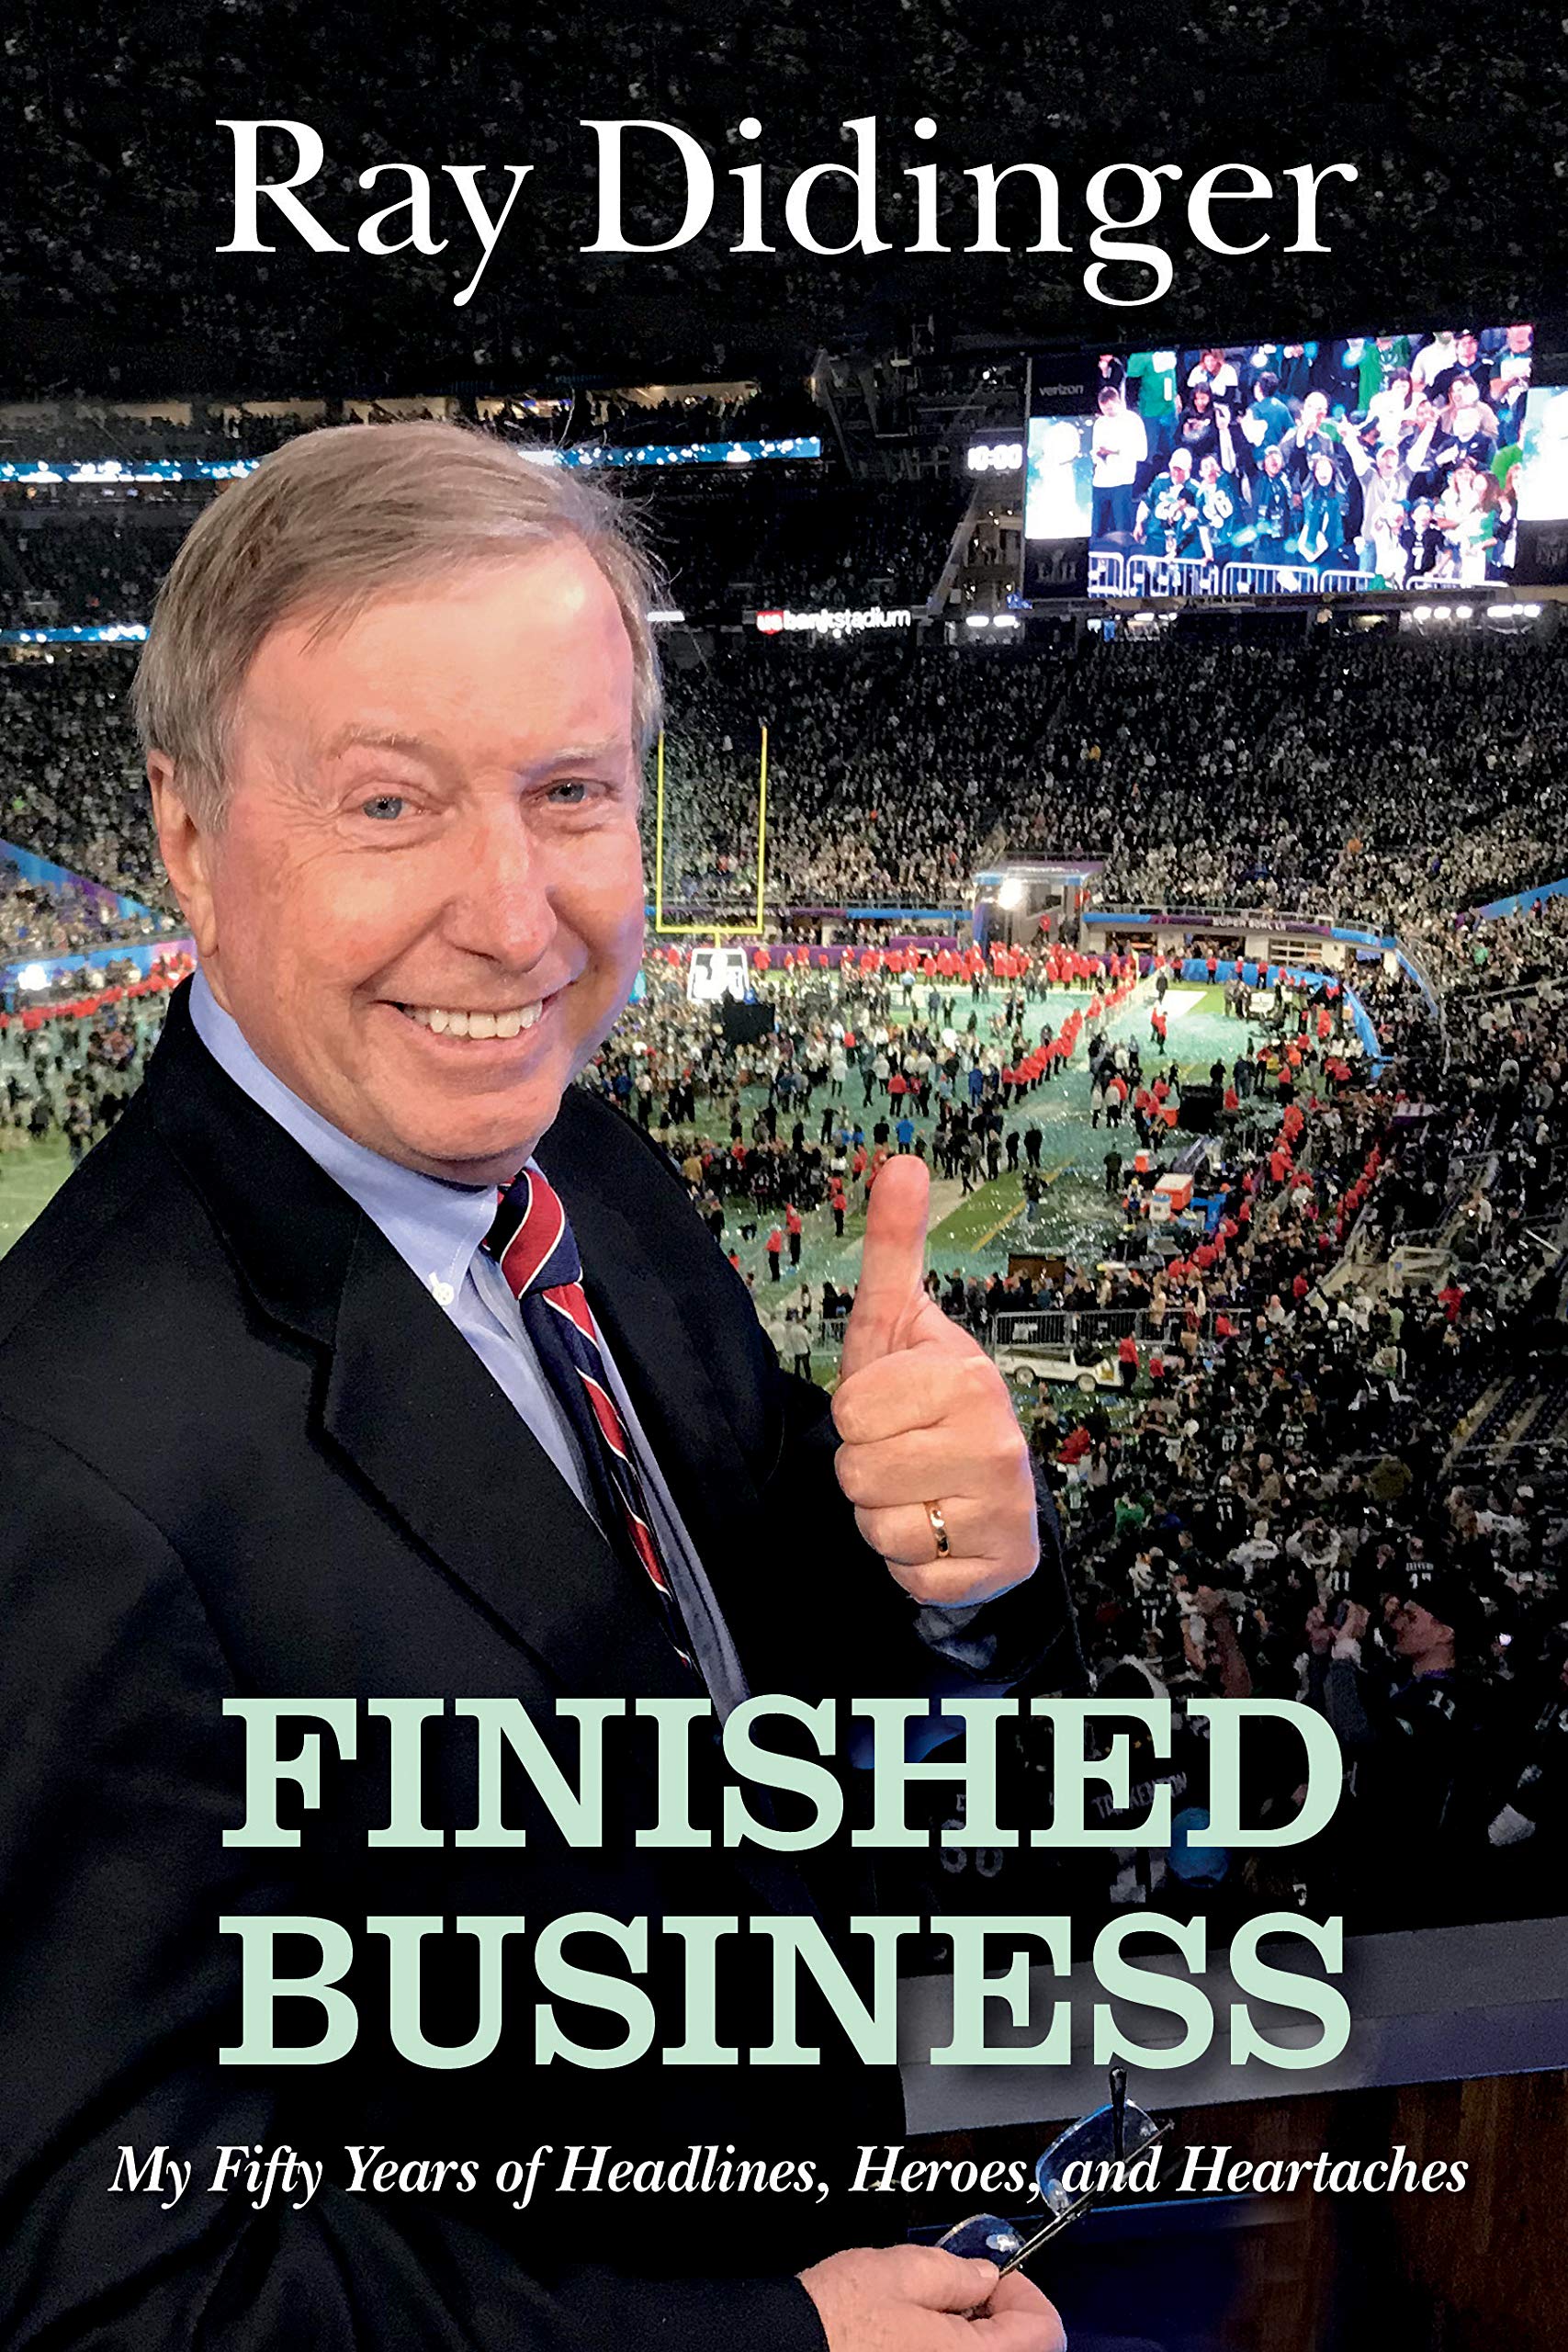 Finished Business: My 50 Years of Headlines, Heroes, and Heartaches by Ray Didinger - Autographed